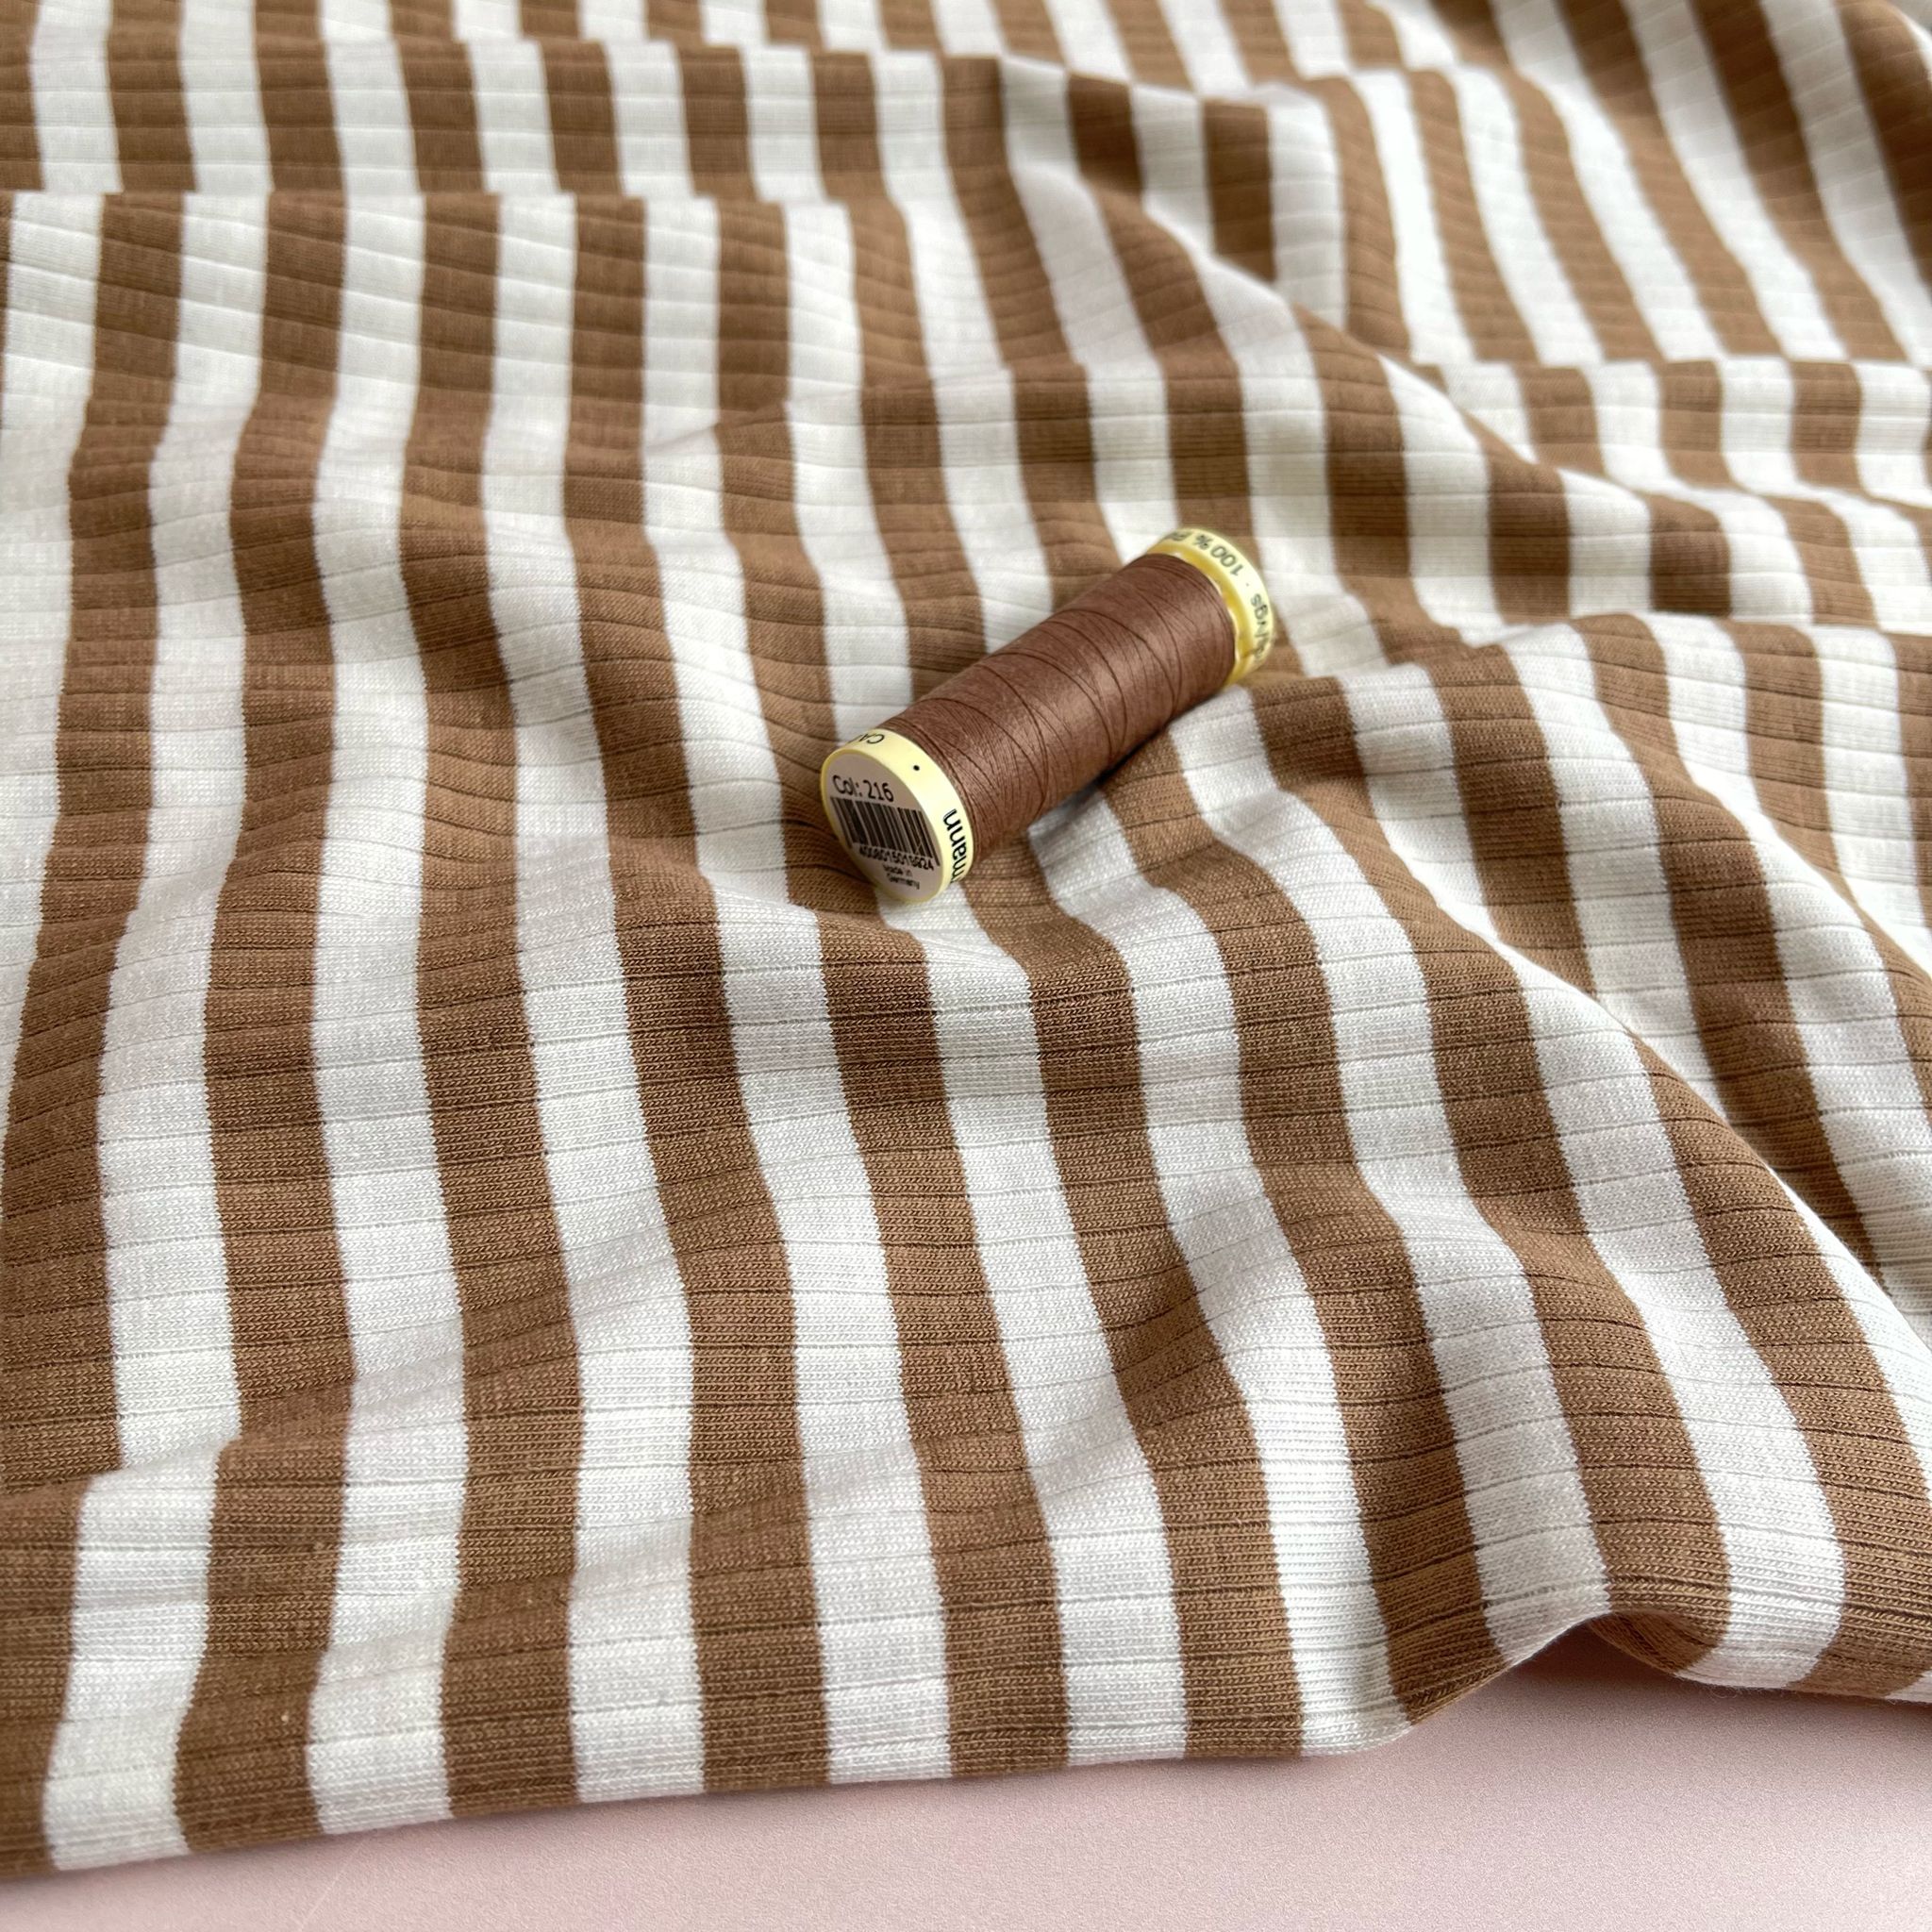 Yarn Dyed Striped Cotton Ribbed Jersey in Mocha Brown and White